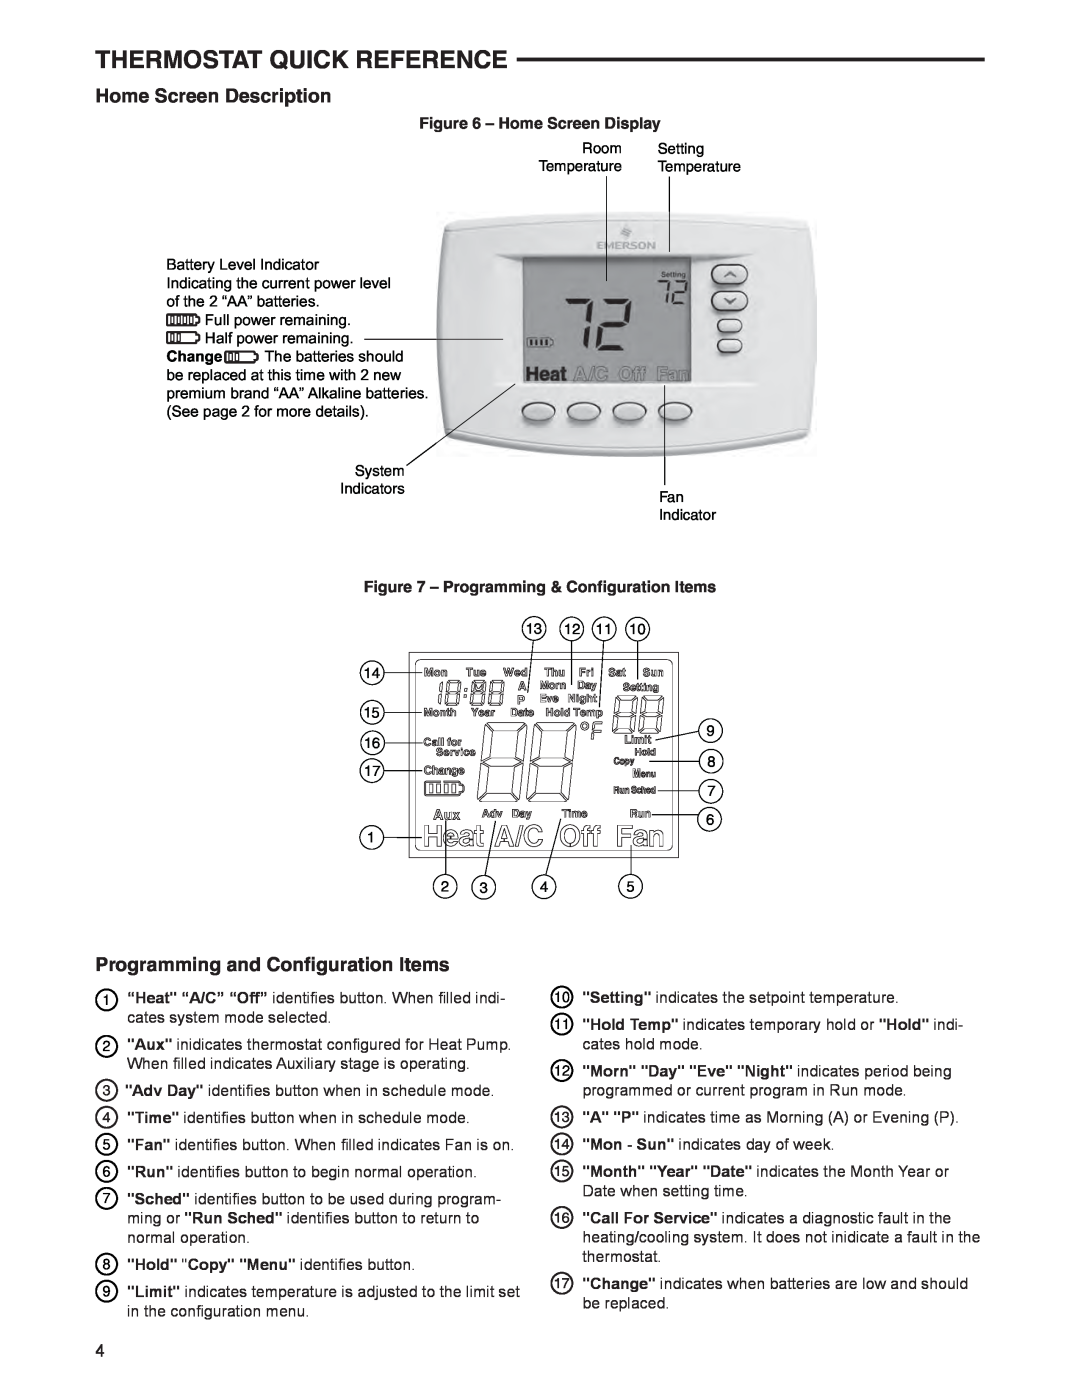 White Rodgers 1F95EZ-0671 Thermostat Quick Reference, Home Screen Description, Programming and Conﬁguration Items 